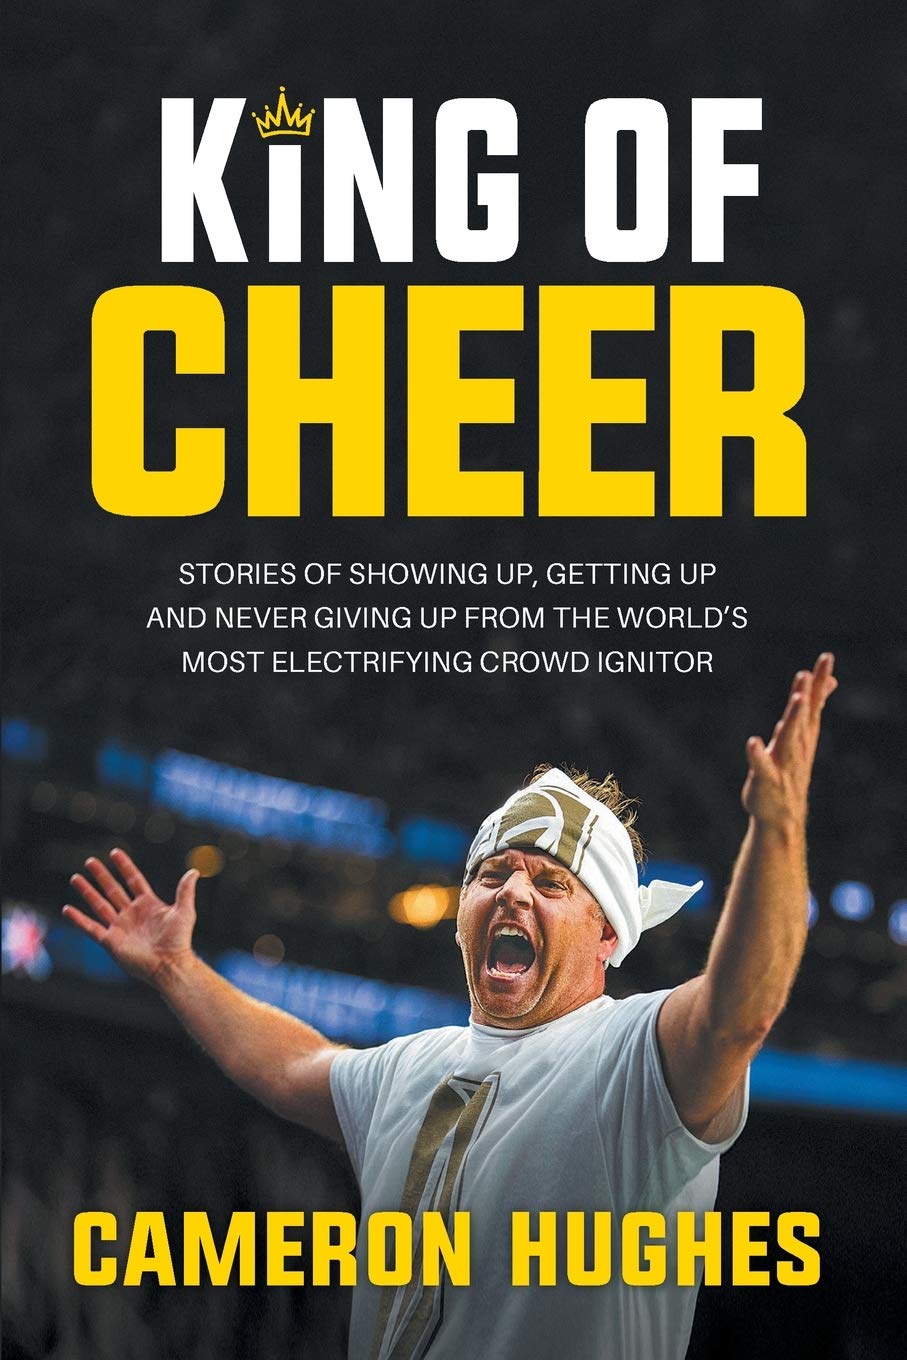 King of Cheer: Stories of Showing up, Getting up and Never Giving Up from the World's Most Electrifying Crowd Ignitor